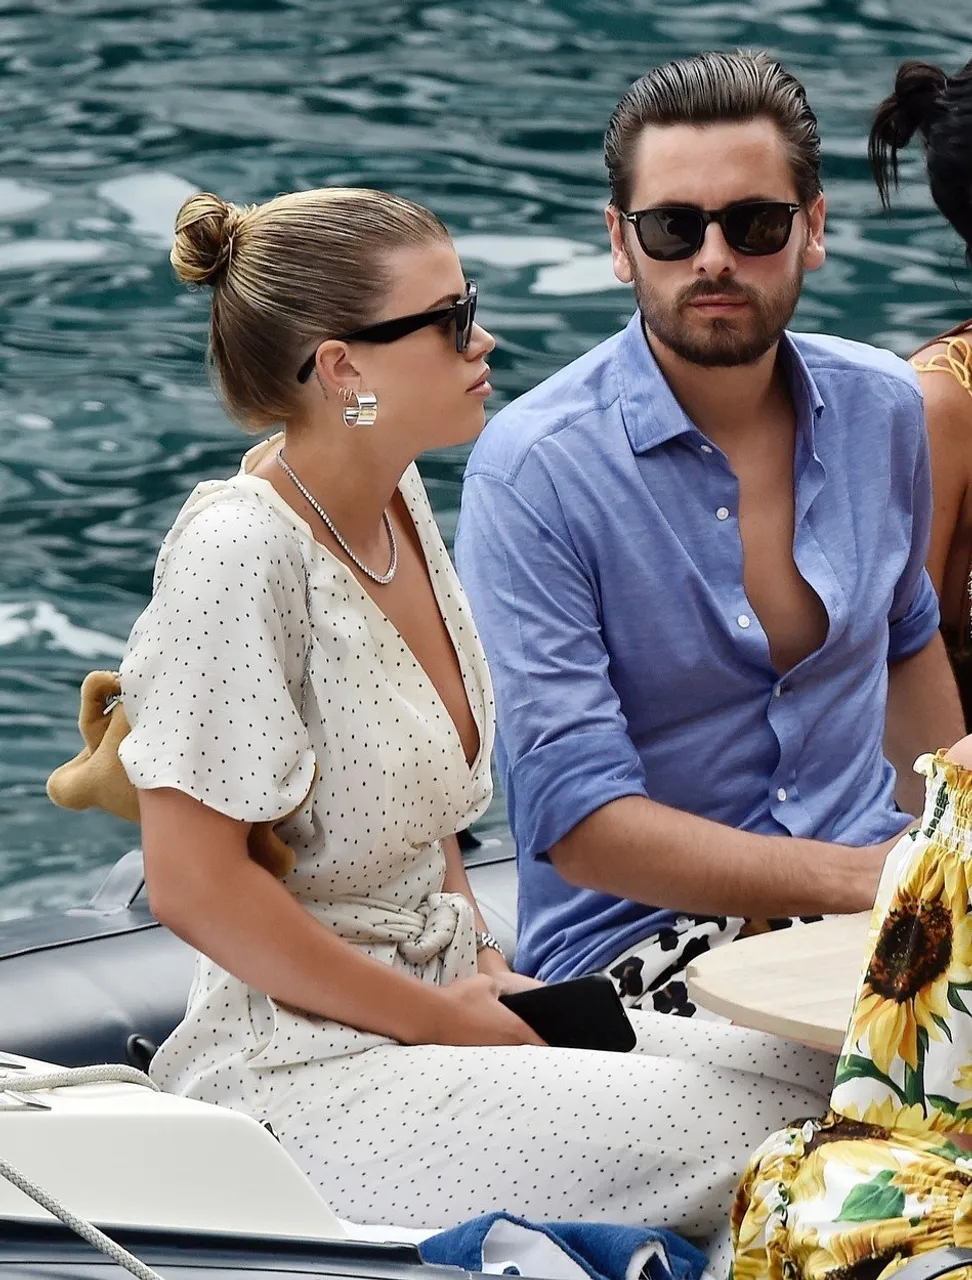 *PREMIUM-EXCLUSIVE* MUST CALL FOR PRICING BEFORE USAGE -STRICTLY NOT AVAILABLE FOR ONLINE USAGE UNTIL 19:25 PM UK TIME ON 13/08/2019 - Lovebirds Scott Disick and Sofia Richie out with the Jenner's on their holiday together in Portofino.